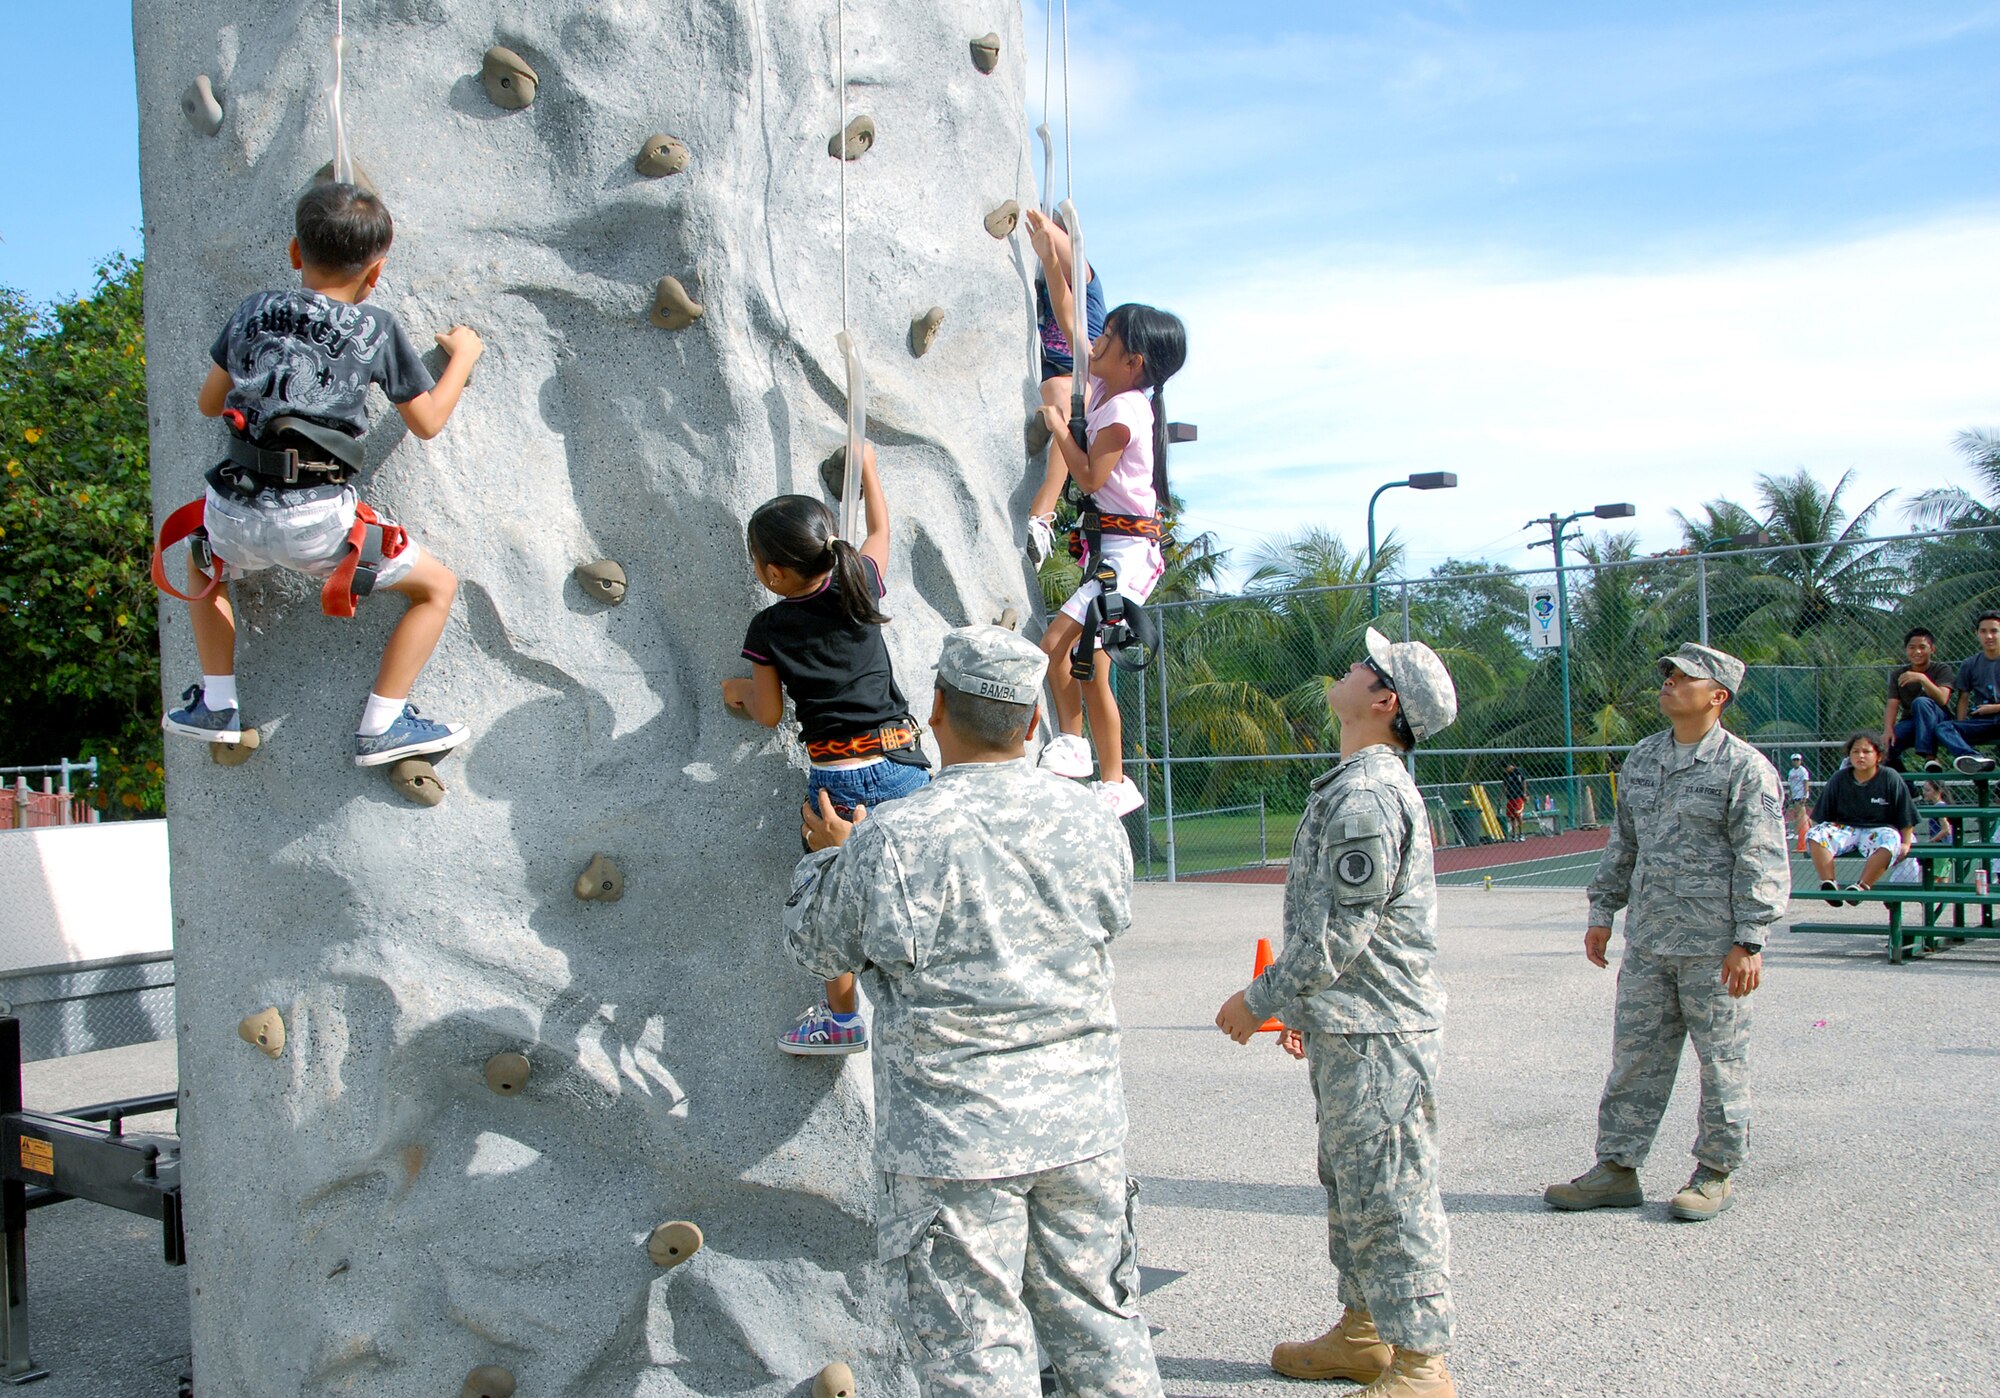 Personnel from the Counterdrug program in Hawaii assist children with the rock wall climbing activity during the Drug Demand Reduction program on Guam, June 29. Counterdrug personnel from Idaho, Hawaii and Guam paid a visit to the Summer Swim Program as part of the DDR mission. The rock wall climbing activity is designed to help build children's confidence and self-esteem as they conquer the rock wall. (U.S. Air Force photo/Tech. Sgt. Betty J. Squatrito-Martin)